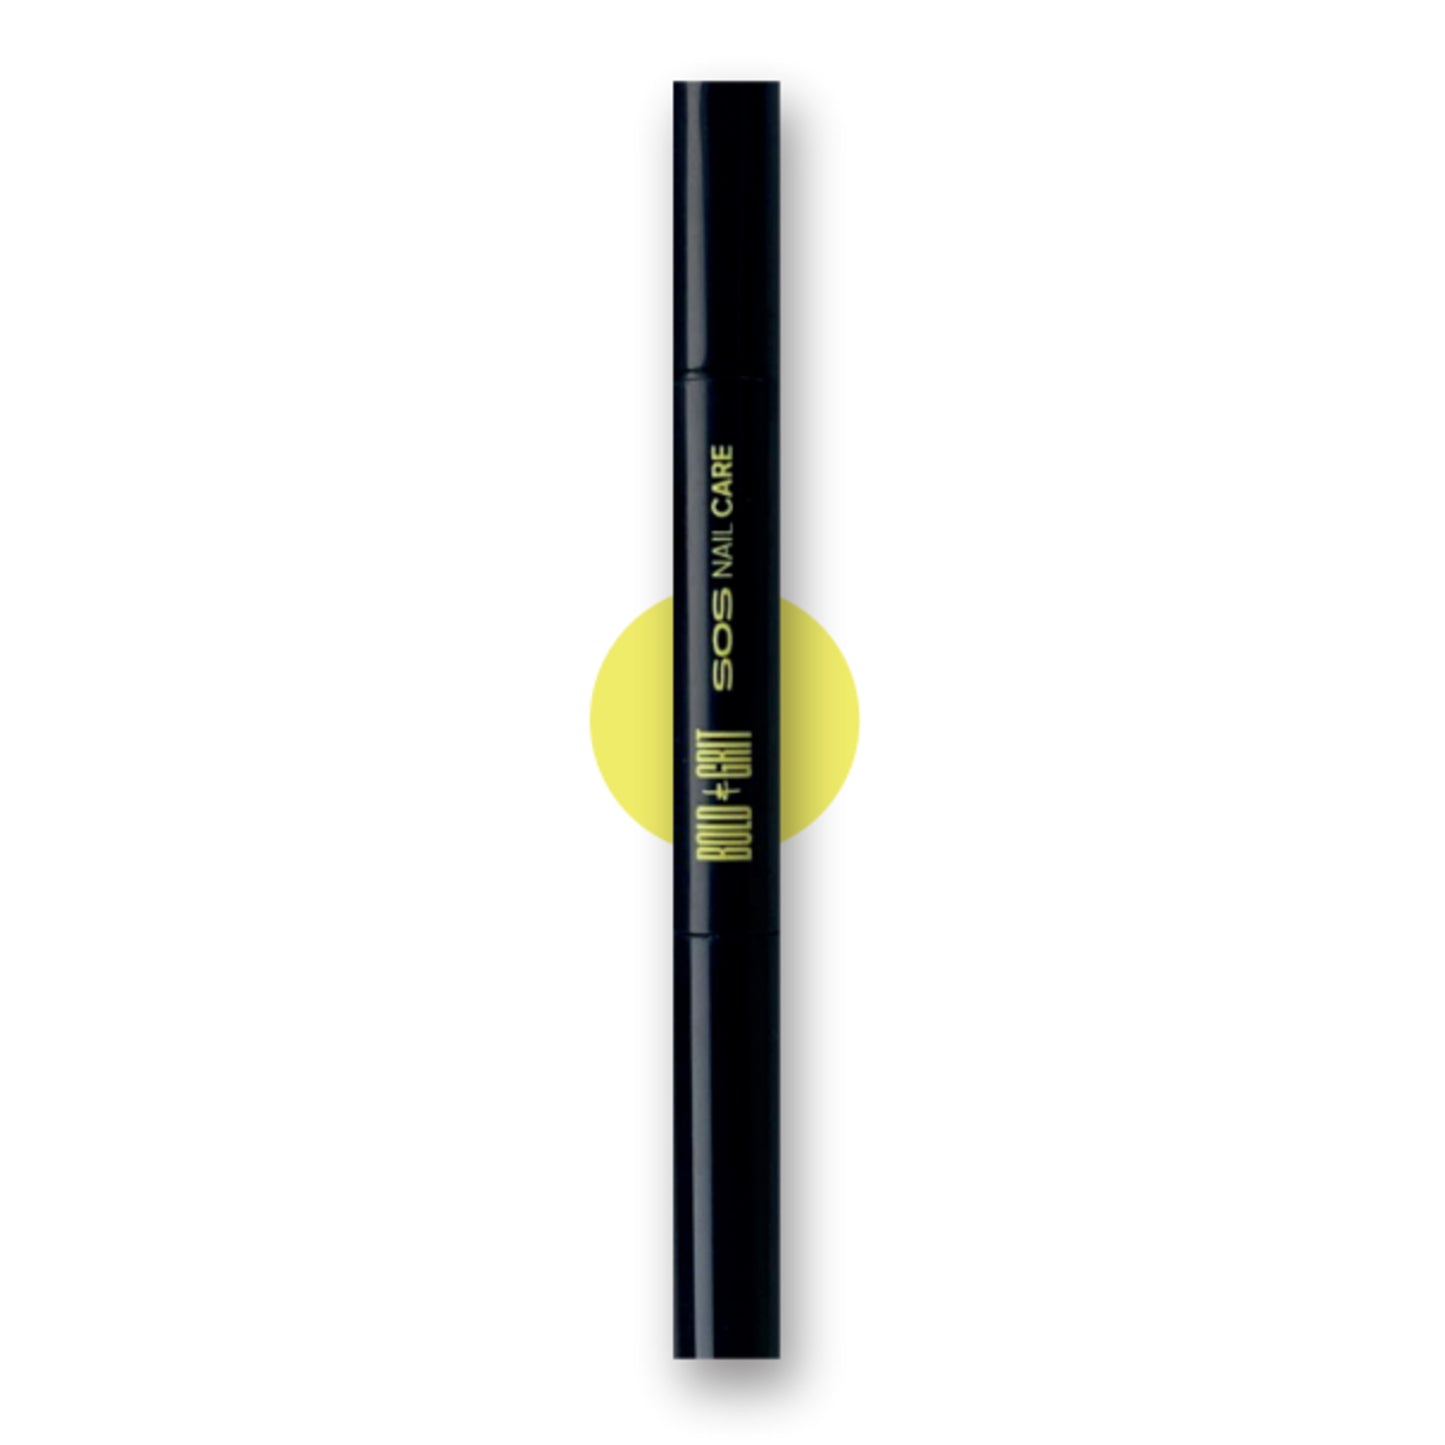 Black pen for manicure at home, with yellow text on it Bold&Grit SOS Nail Care. Pen formulated for beautiful nails.